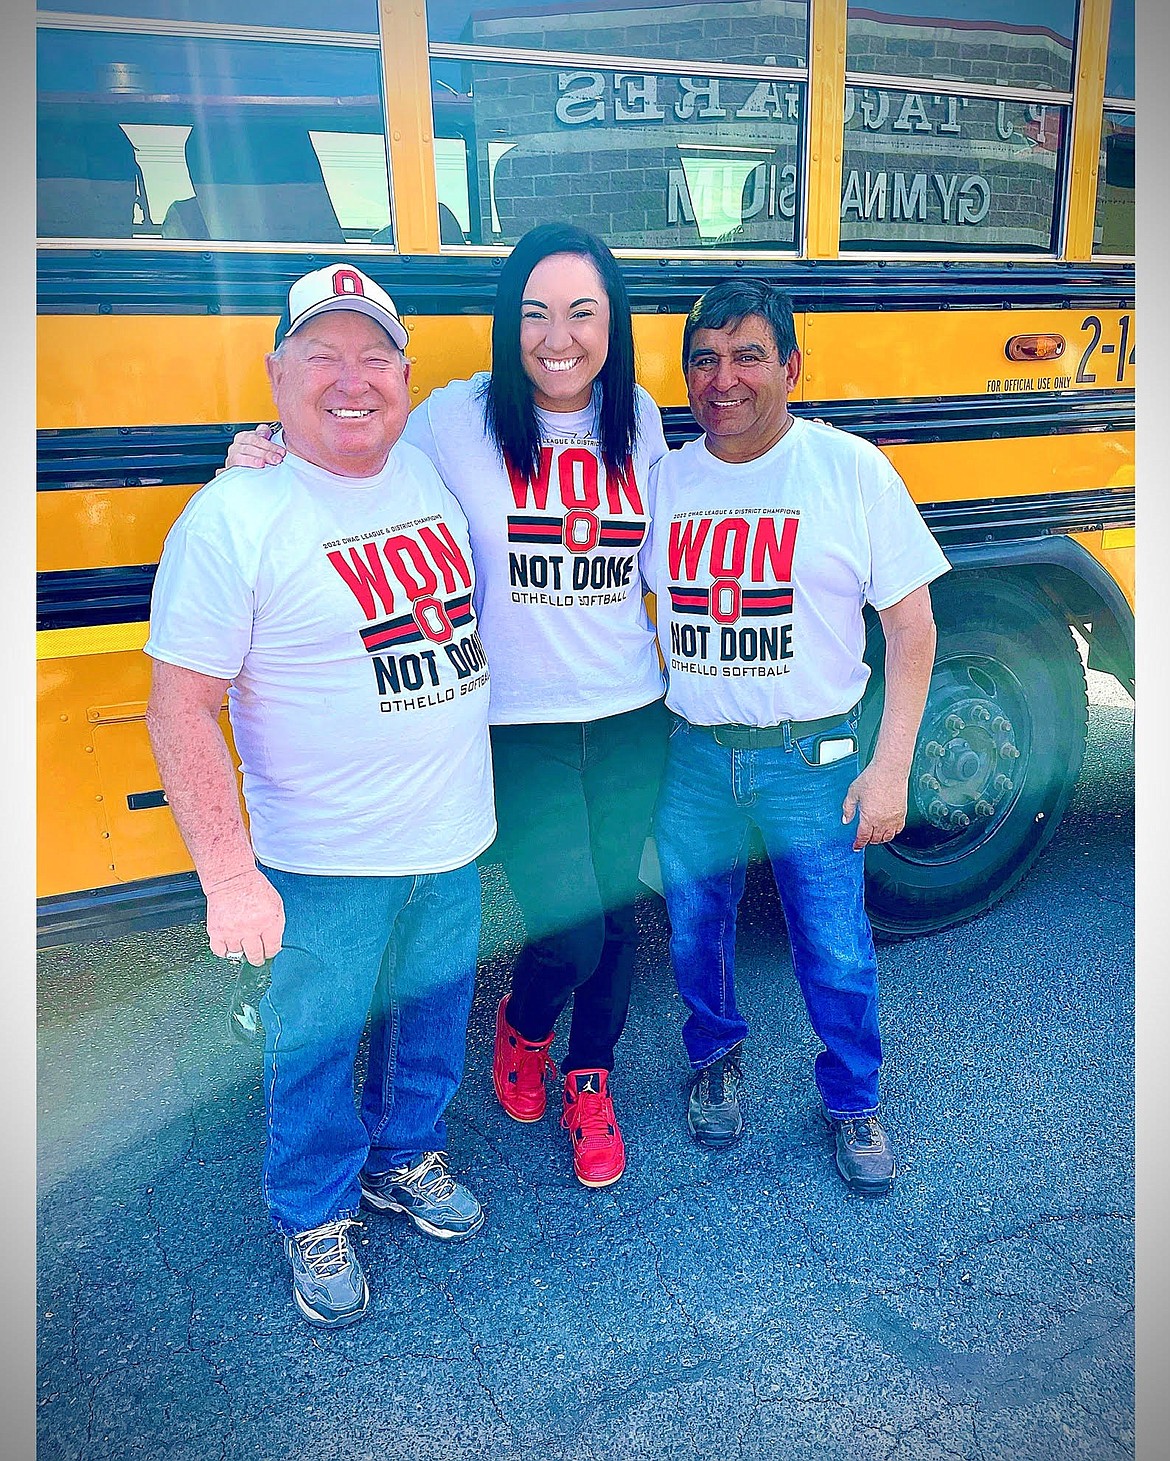 Jenny McCourtie, middle, poses with Othello softball coaches Mike Jensen, left, and Rudy Ochoa, right. Jensen and Ochoa served as coaches for McCourtie when she was in high school.